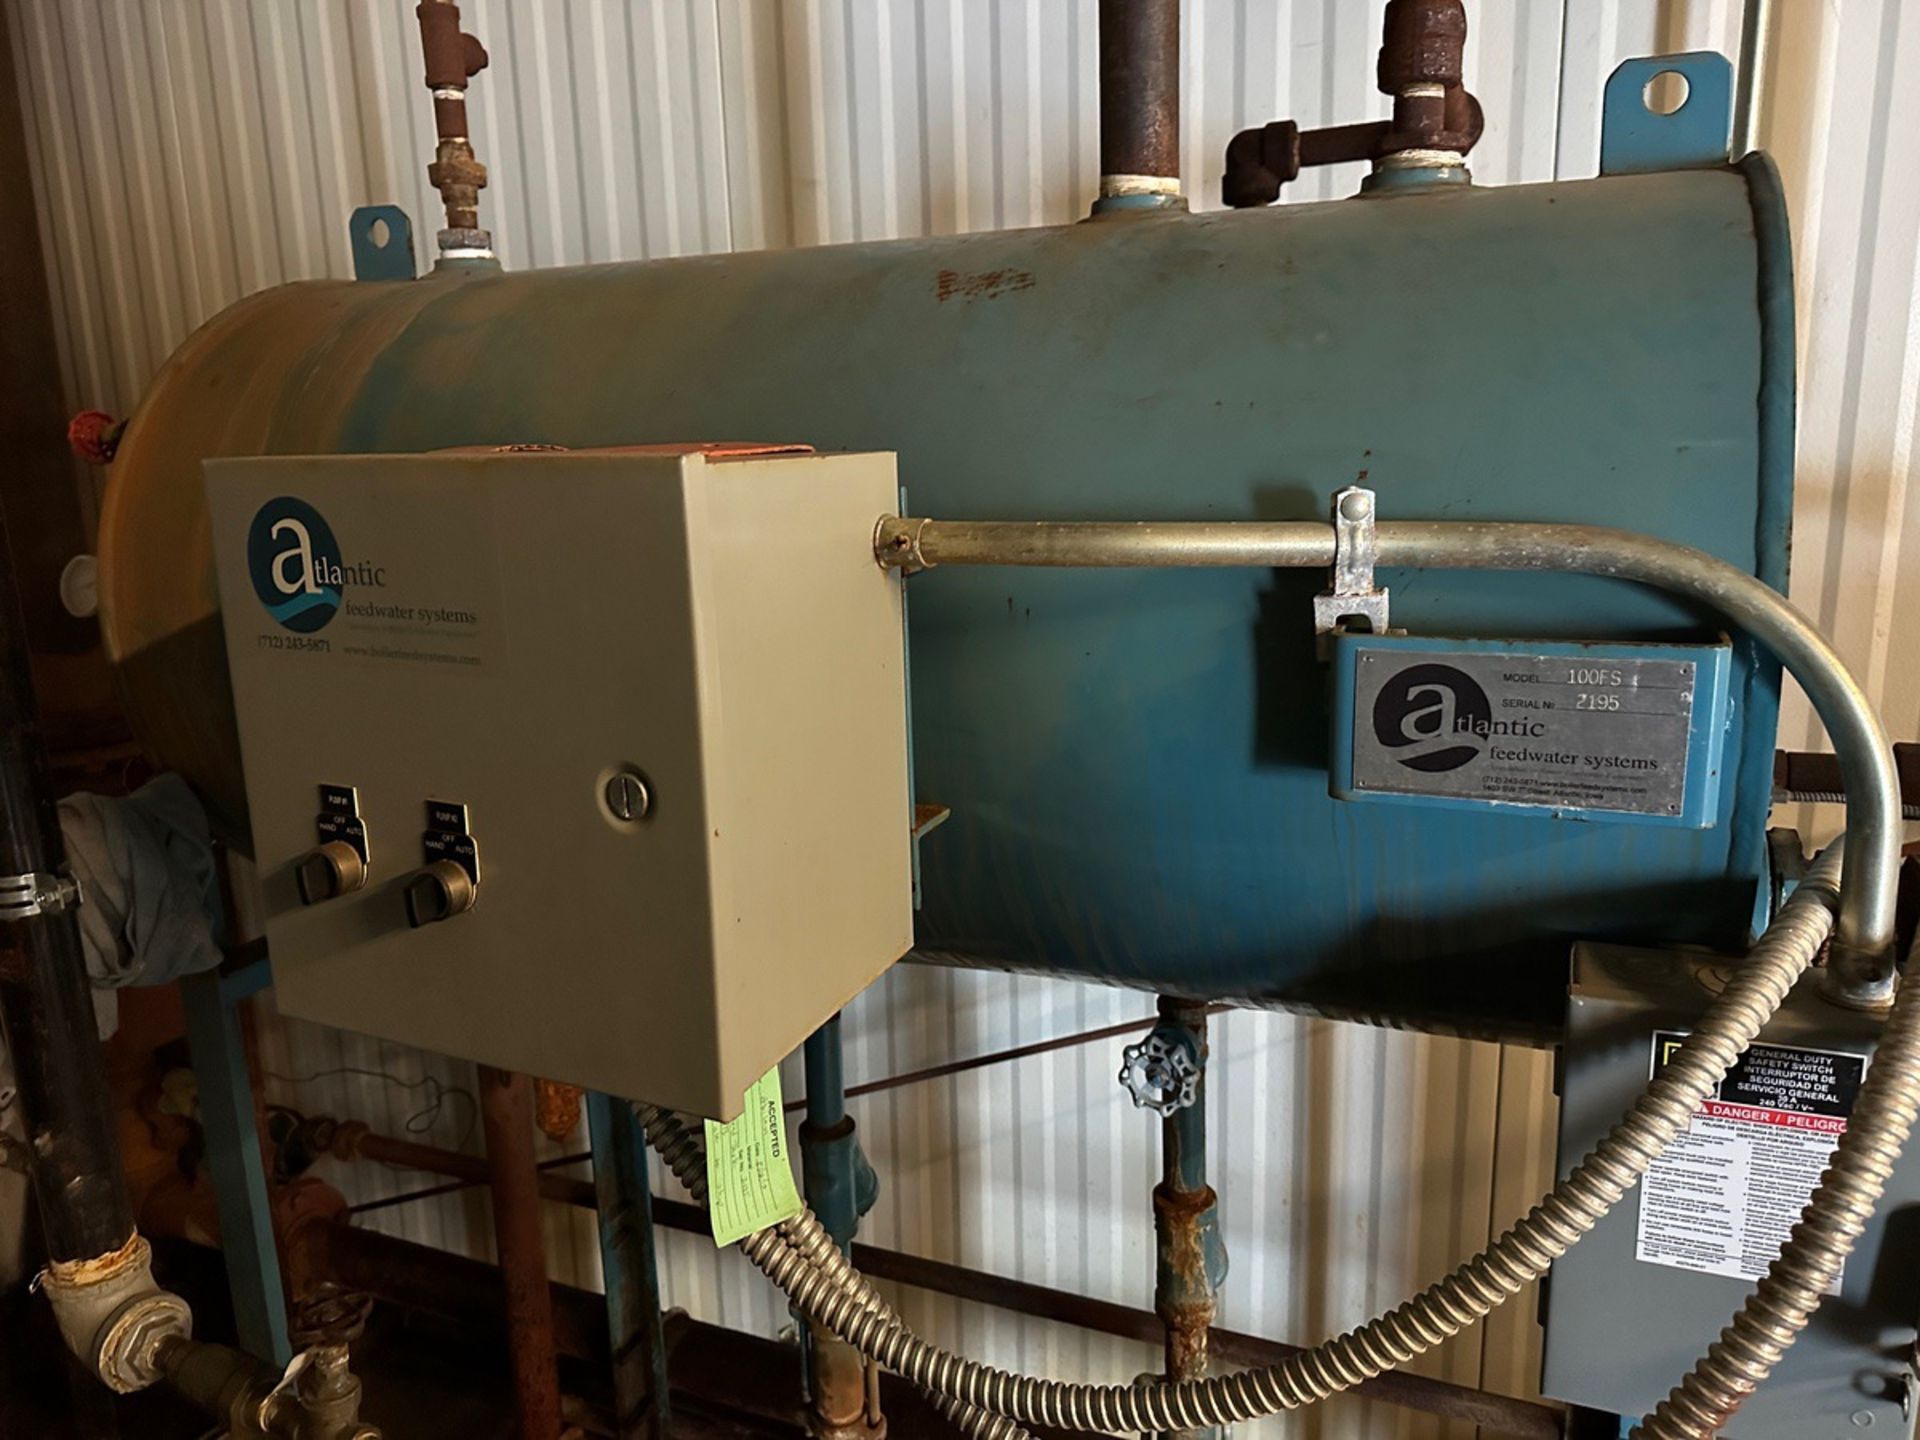 Ajax 150 PSI Natural Gas Steam Boiler with Blowdown and Treatment Tanks, Model | Rig Fee $1200 - Image 5 of 7